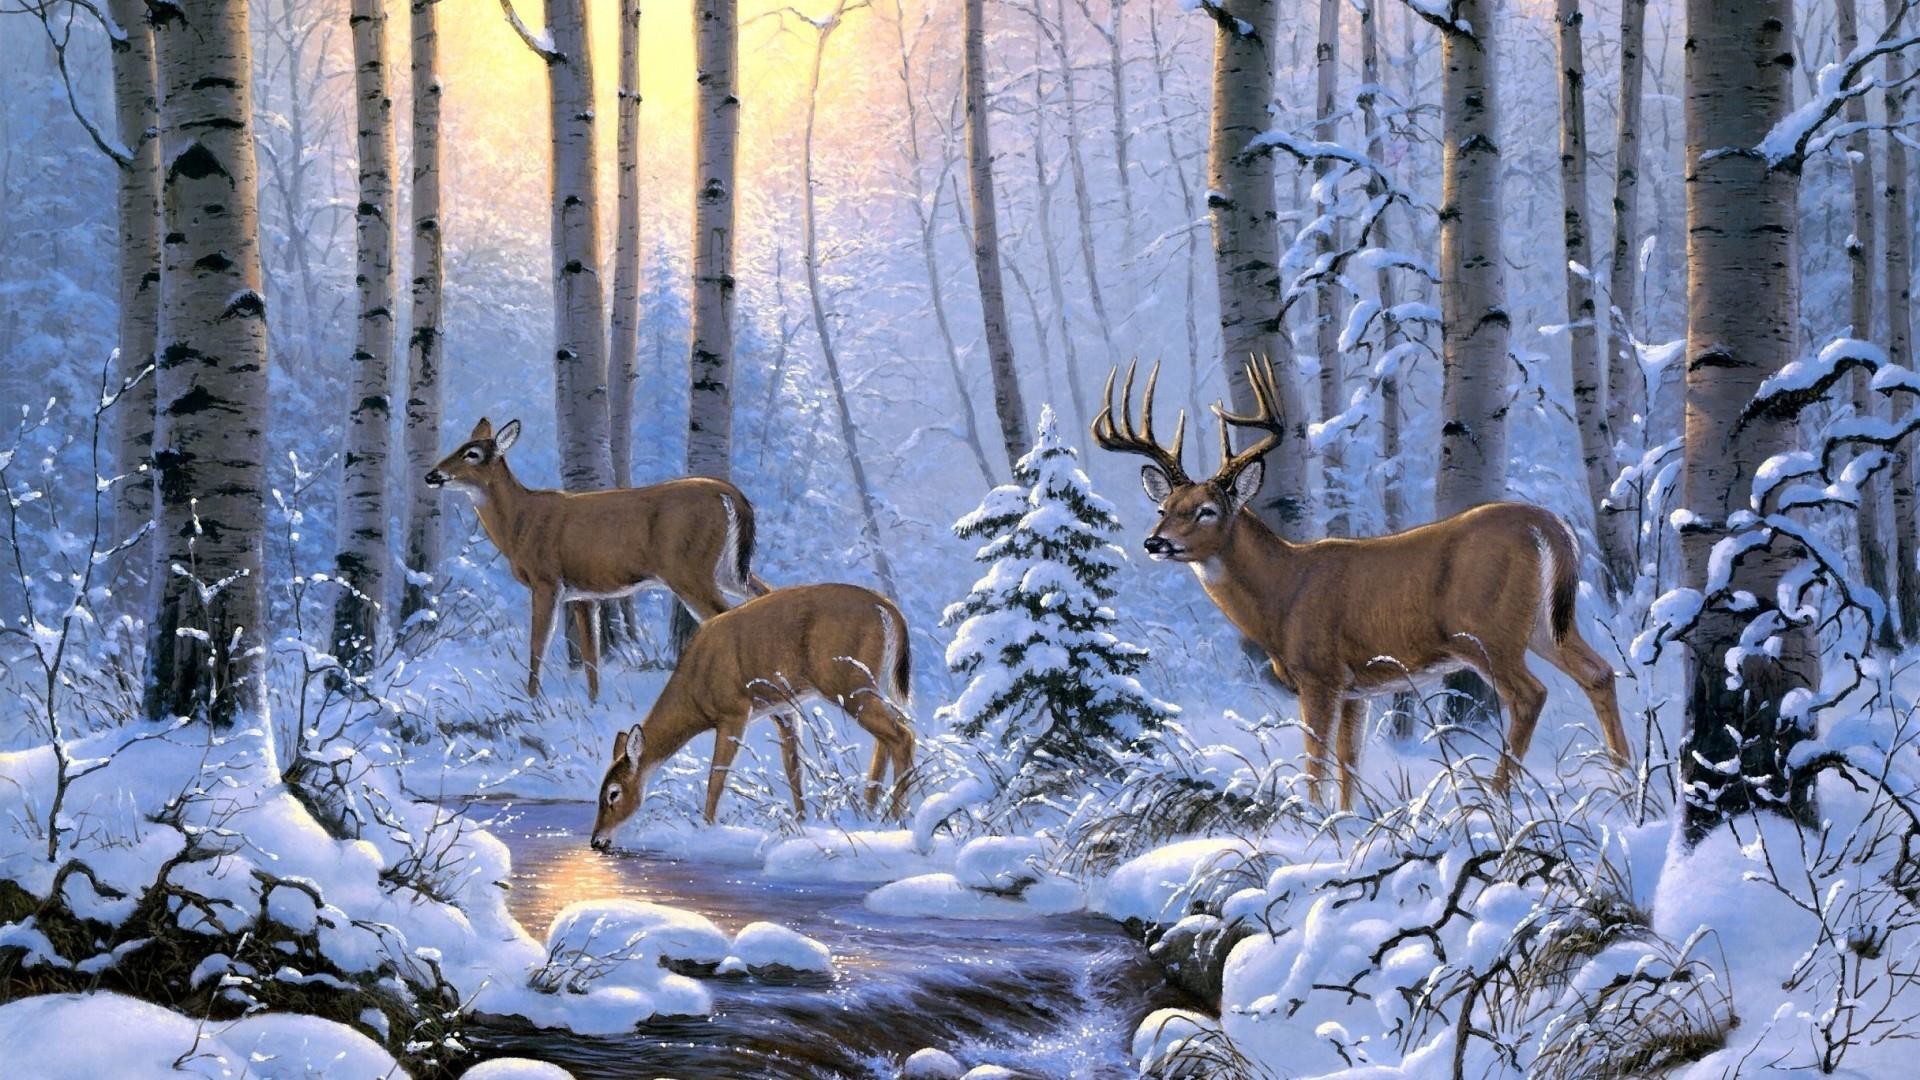 Discover 78+ whitetail deer wallpaper latest - in.coedo.com.vn